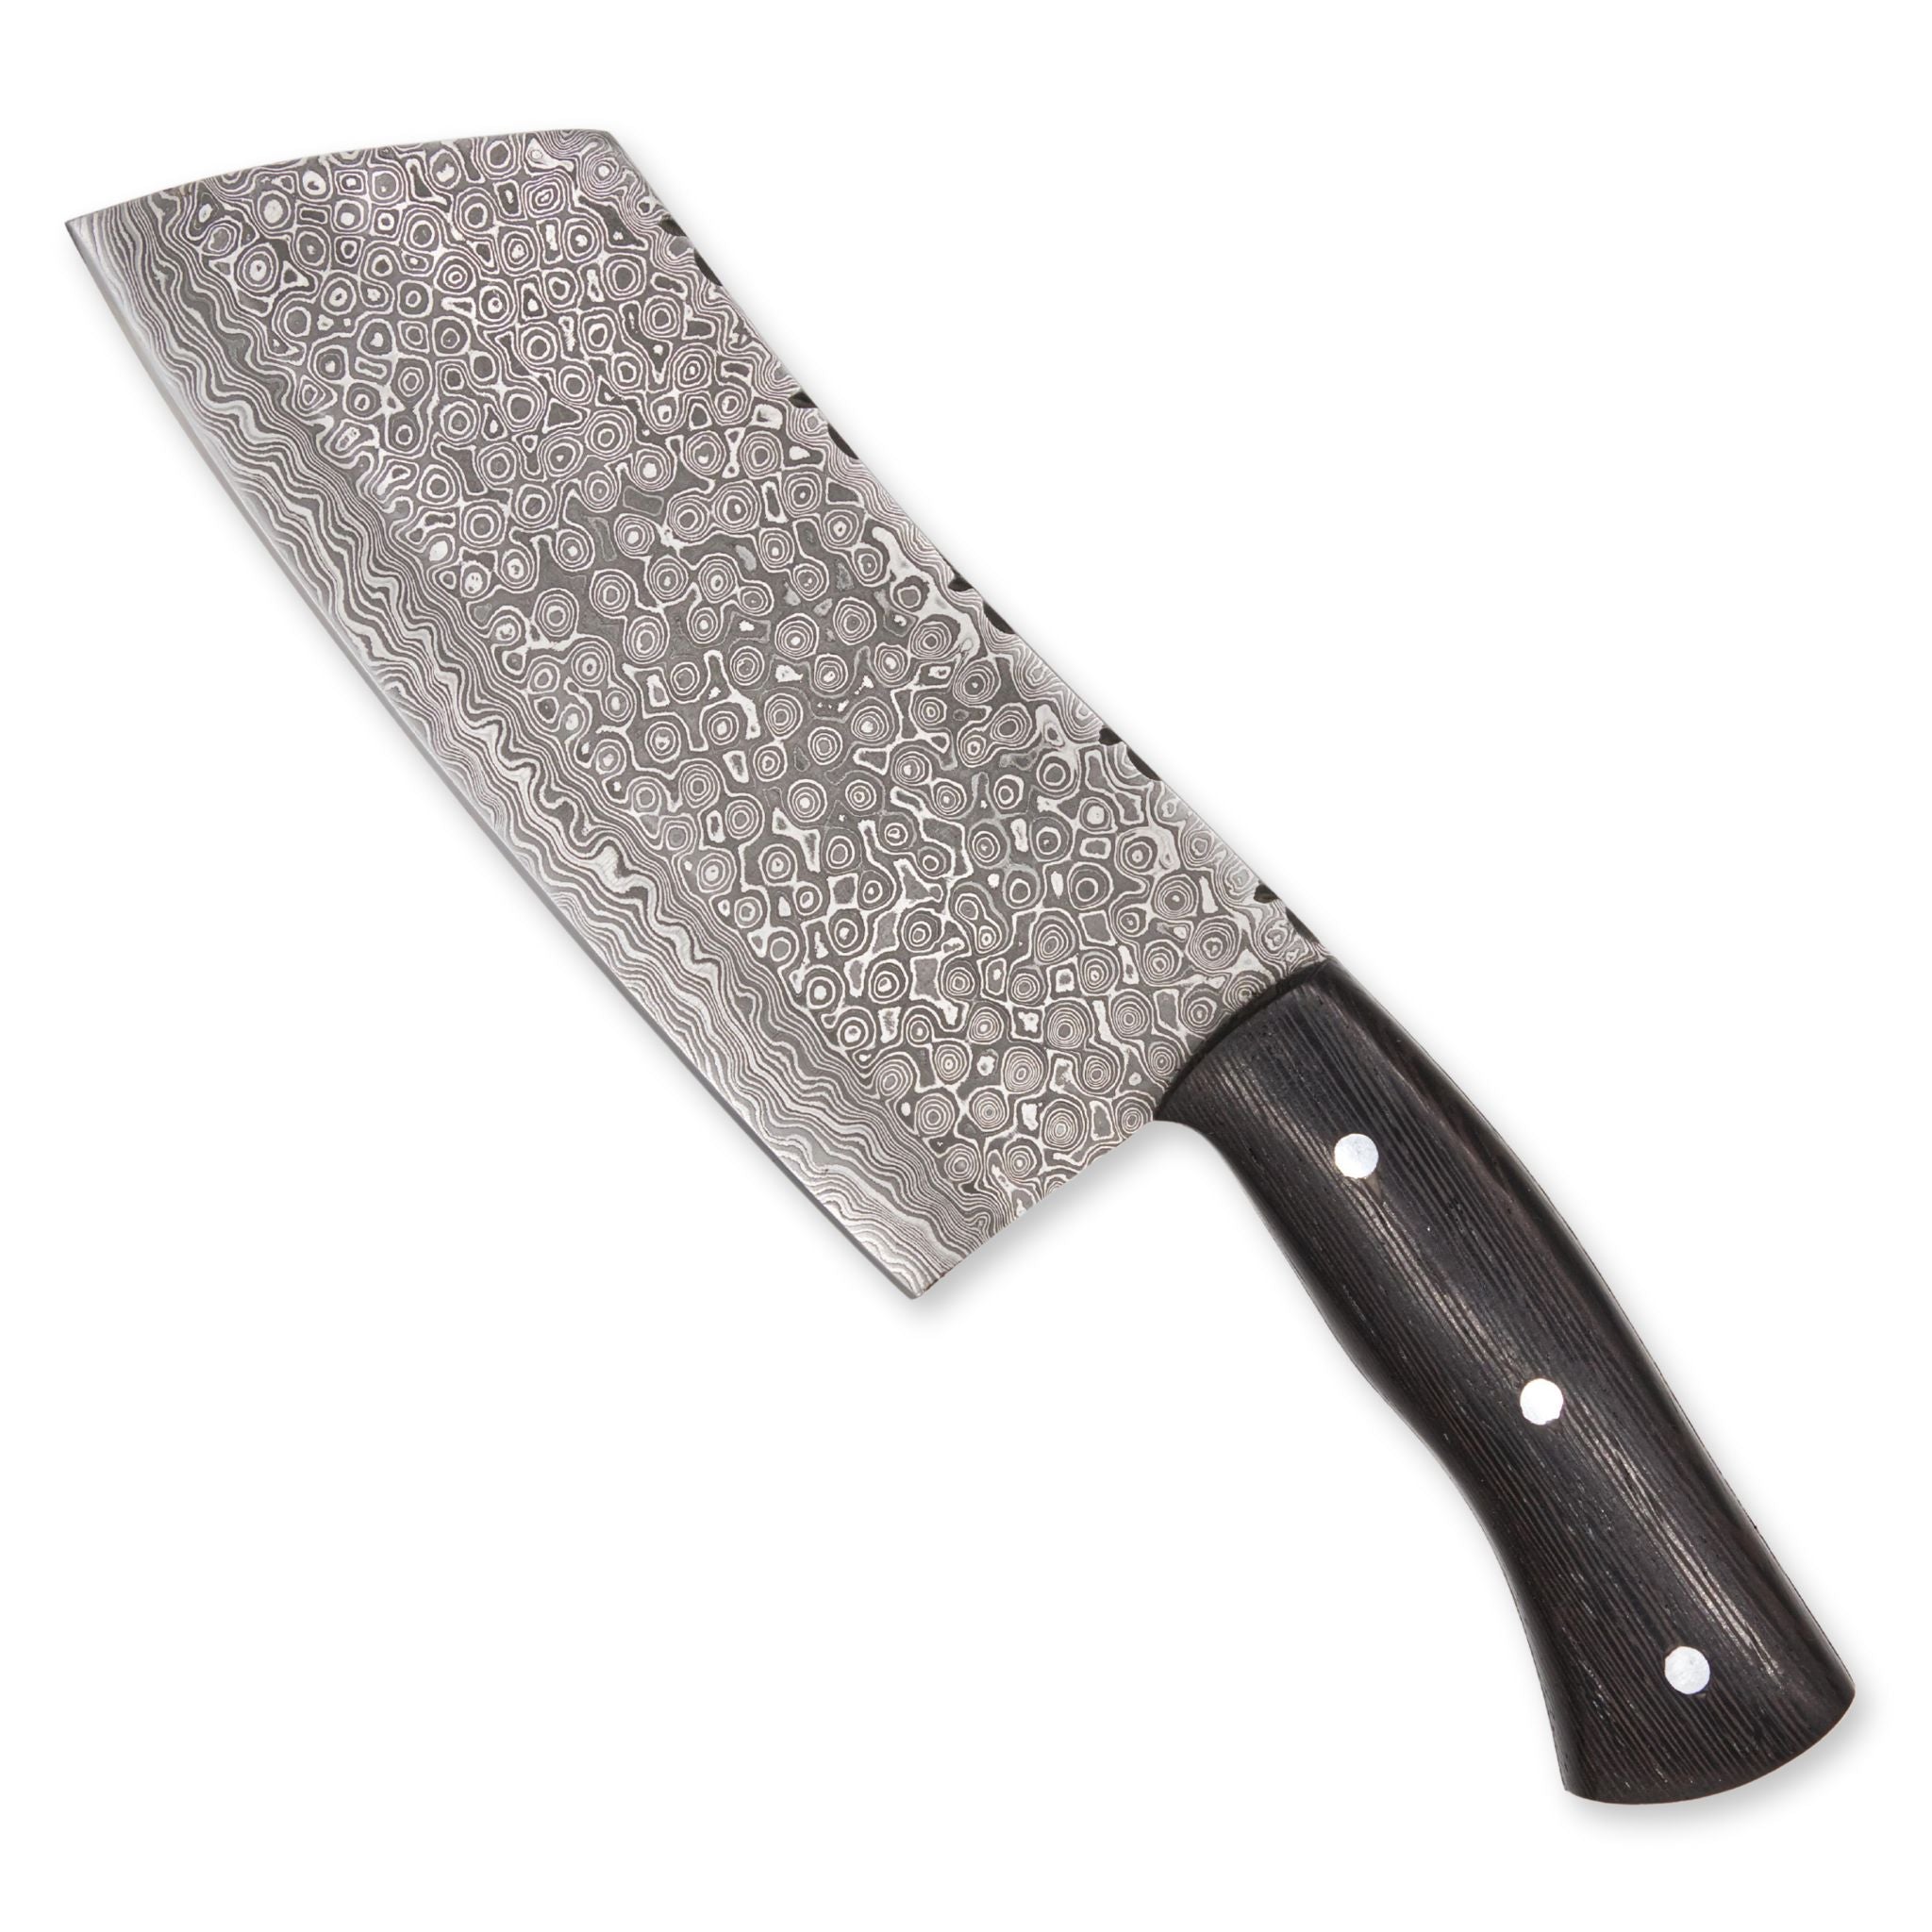 Max Mettle I, Damascus Steel, Handmade Chef's Meat Cleaver